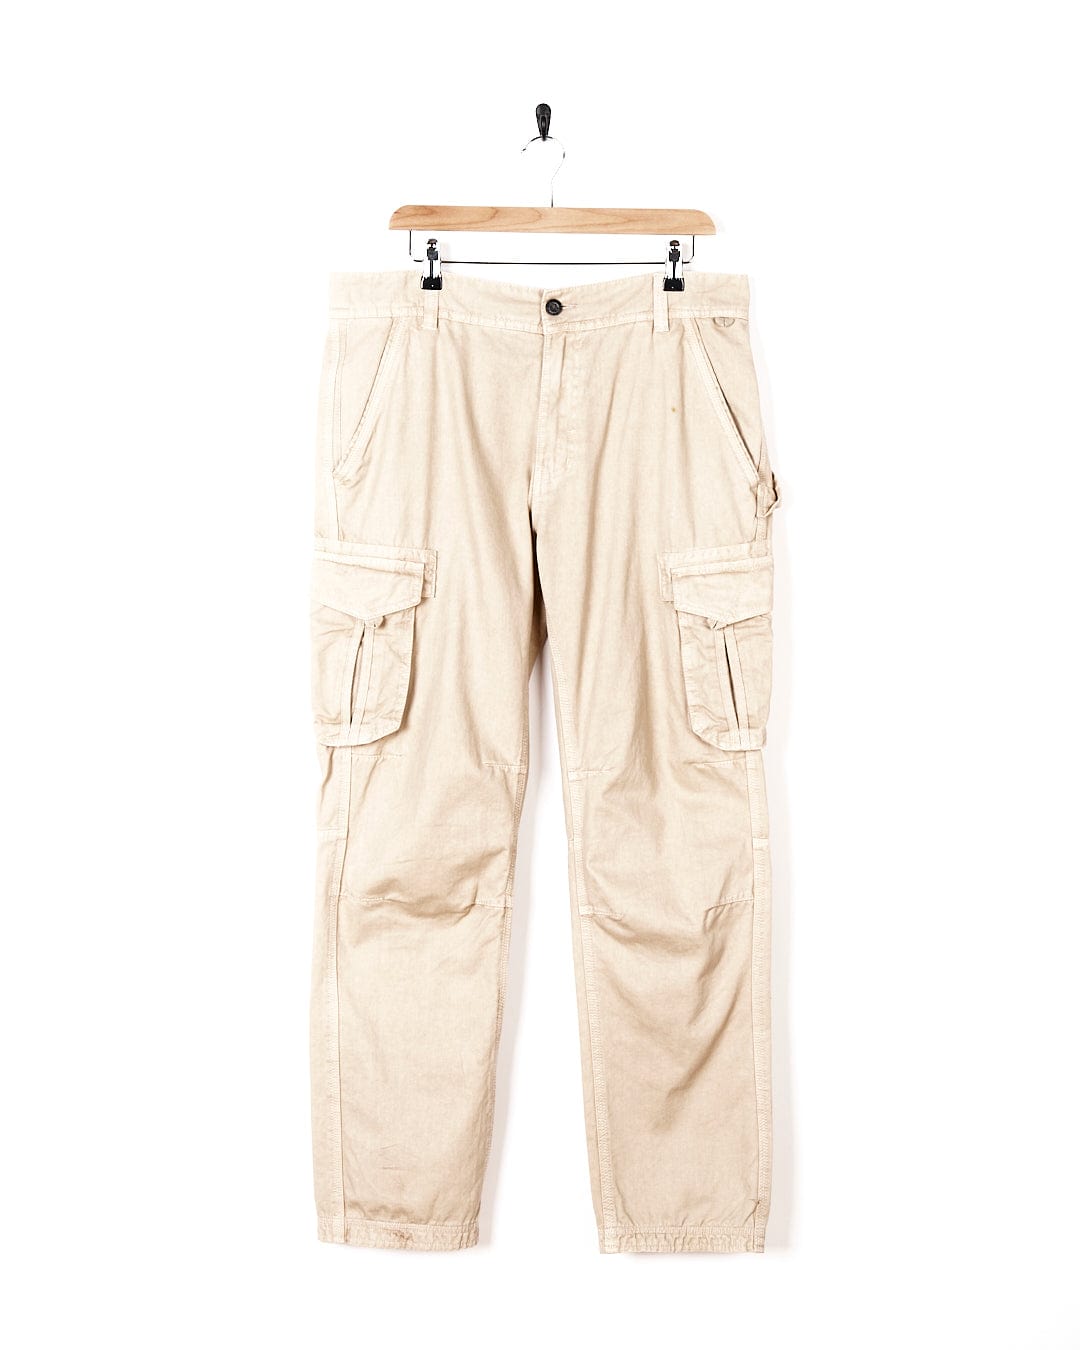 A pair of Godrevy - Mens Cargo Trouser - Sand pants by Saltrock hanging on a hanger.